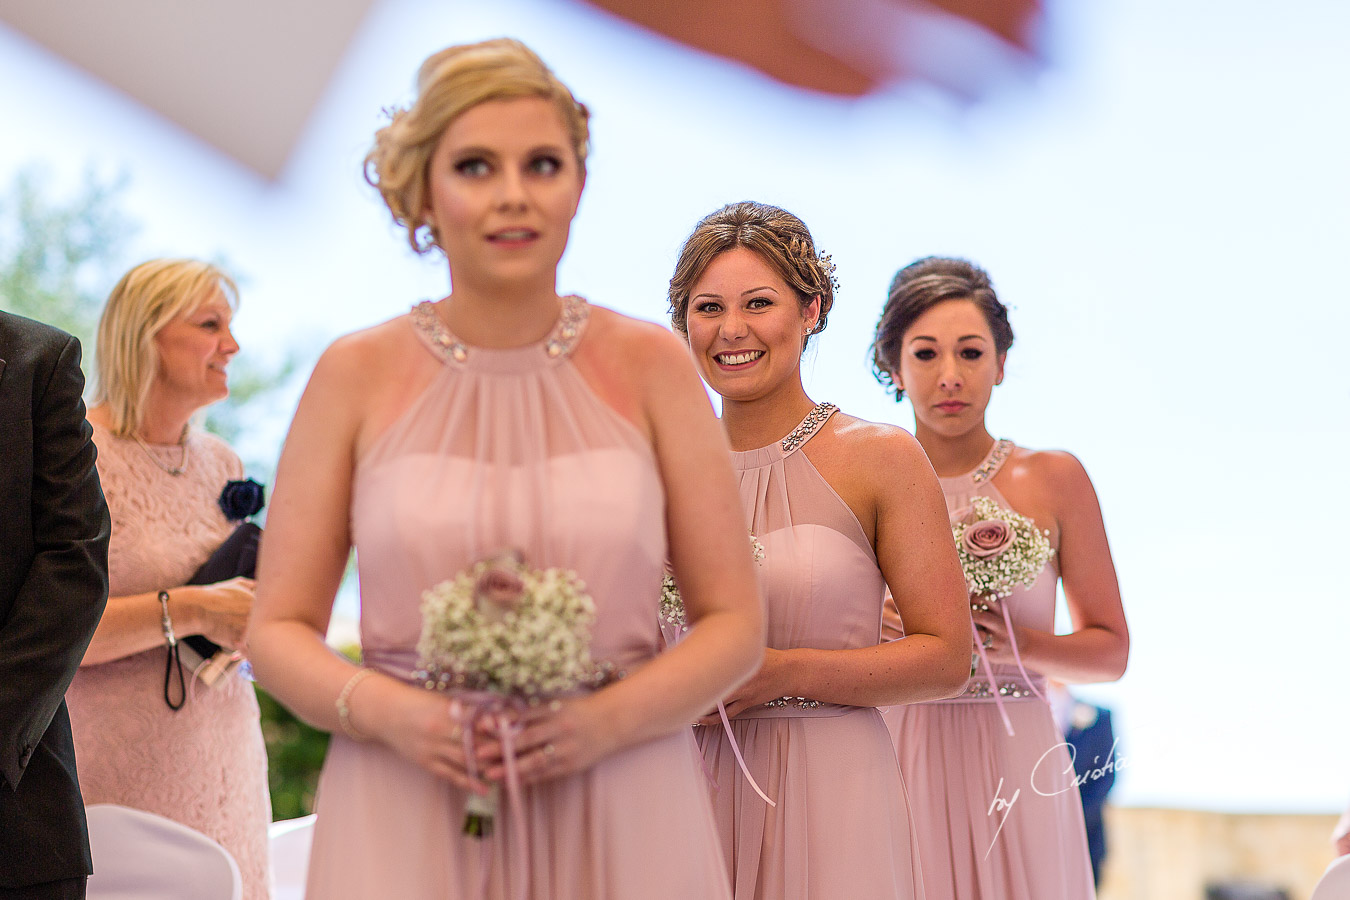 The moment when the bridesmaids arrive at the wedding ceremony at Aphrodite Hills Resort in Cyprus, captured by photographer Cristian Dascalu.